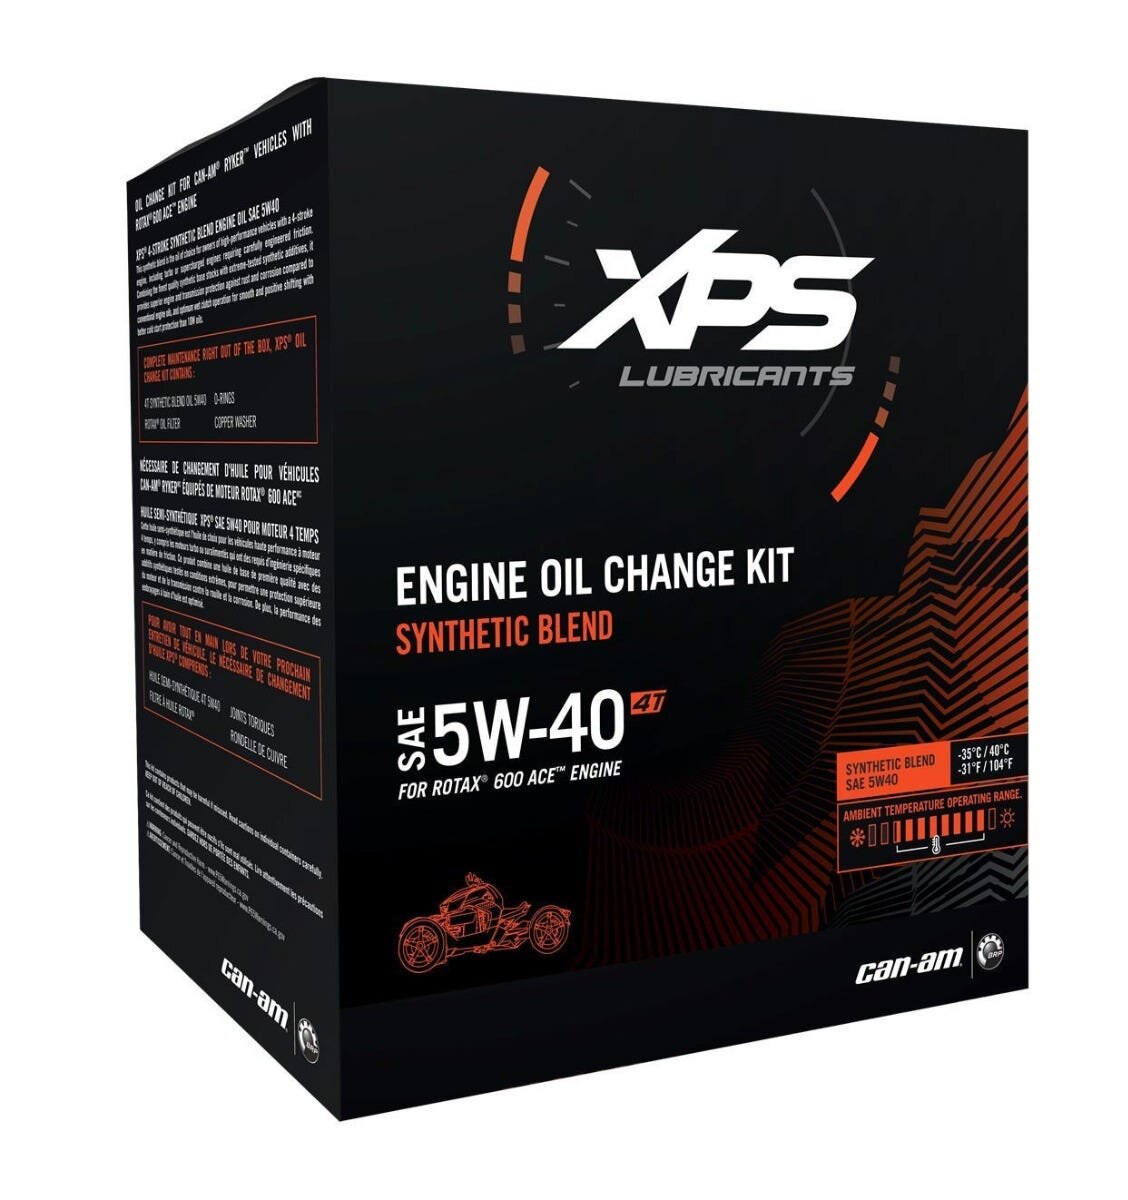 5W 40 Synthetic Blend Oil Change Kit for Can Am Ryker Rotax 600 ACE Engine